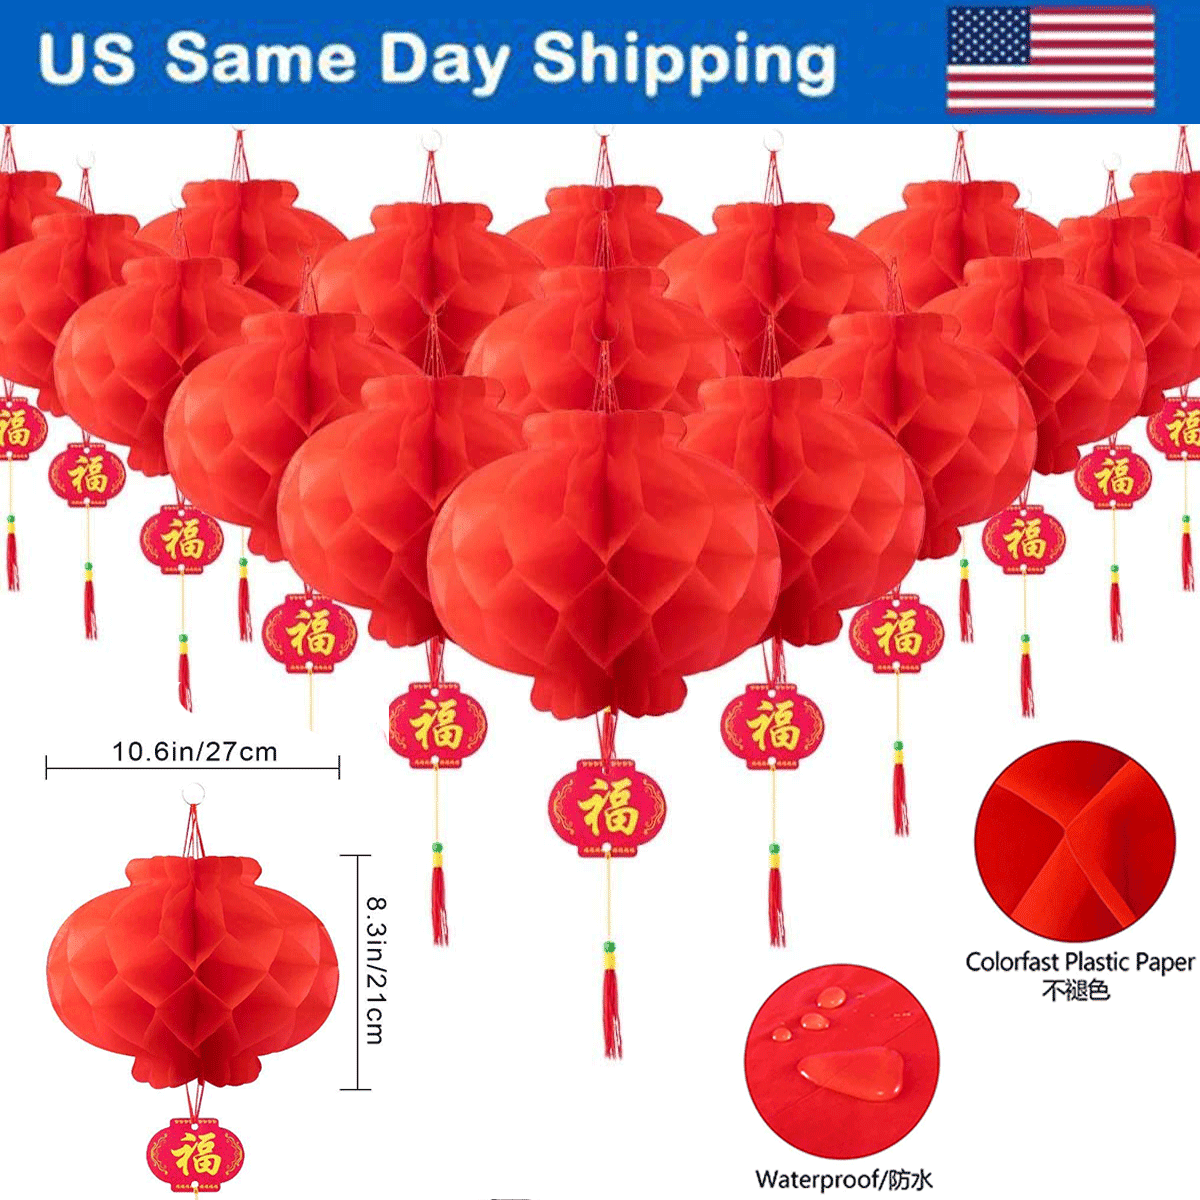 68 Pcs 2023 Lunar Chinese New Year Decoration Set, Couplets Chunlian Paper  Red Lantern Chinese Fu Paper Window Ornaments Chinese Knots for Spring